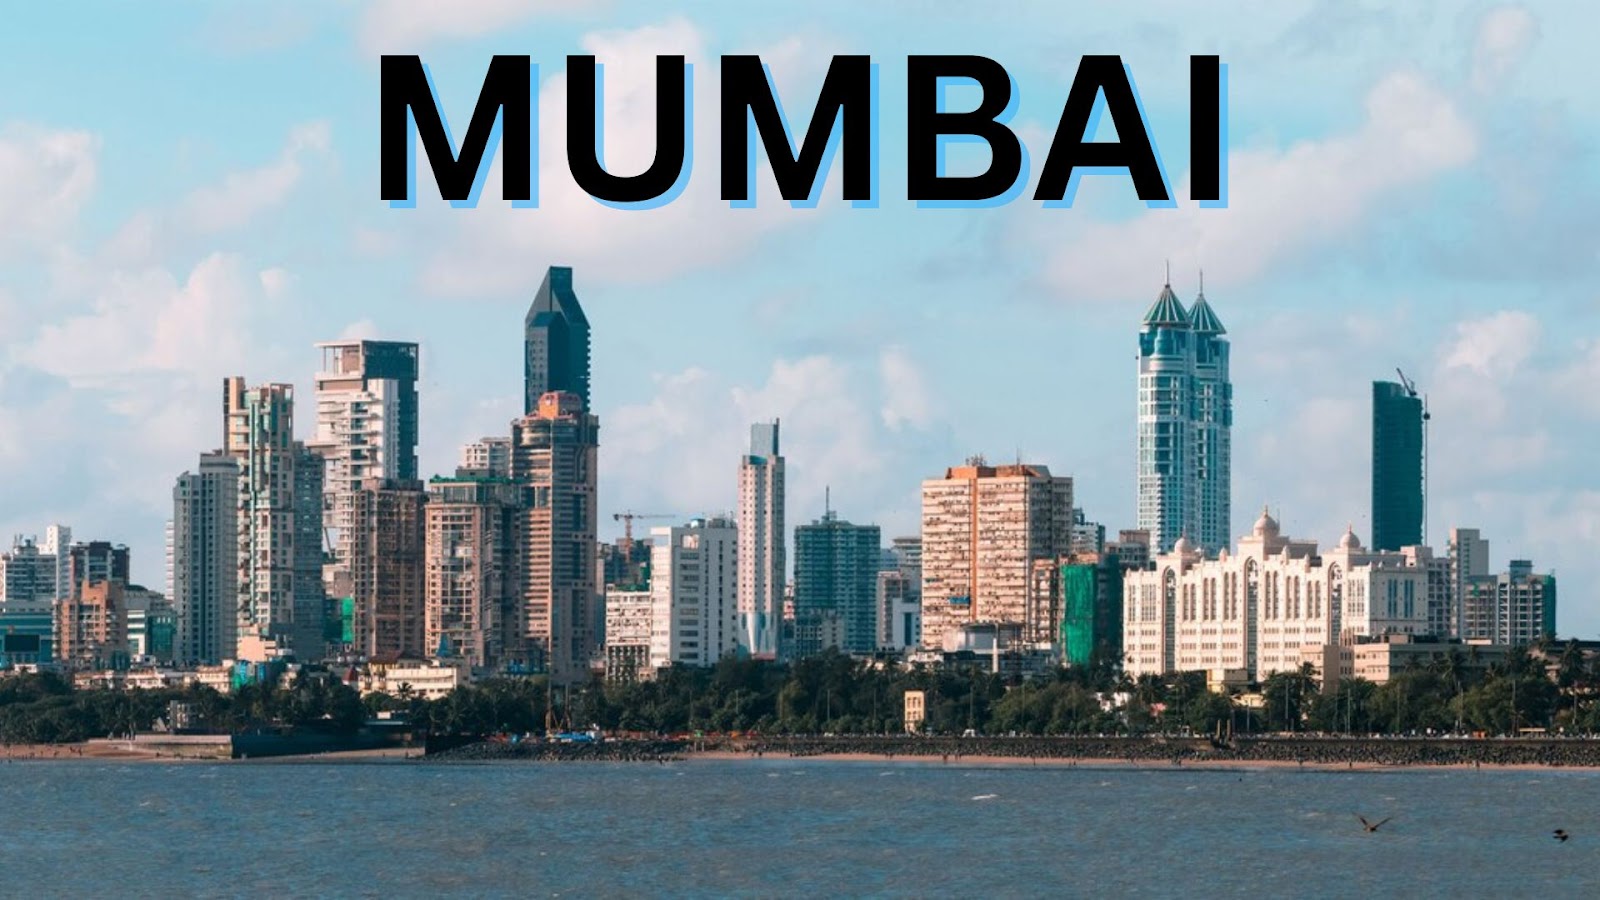 Mumbai is known for creating opportunities and development and is also known as a financial city.